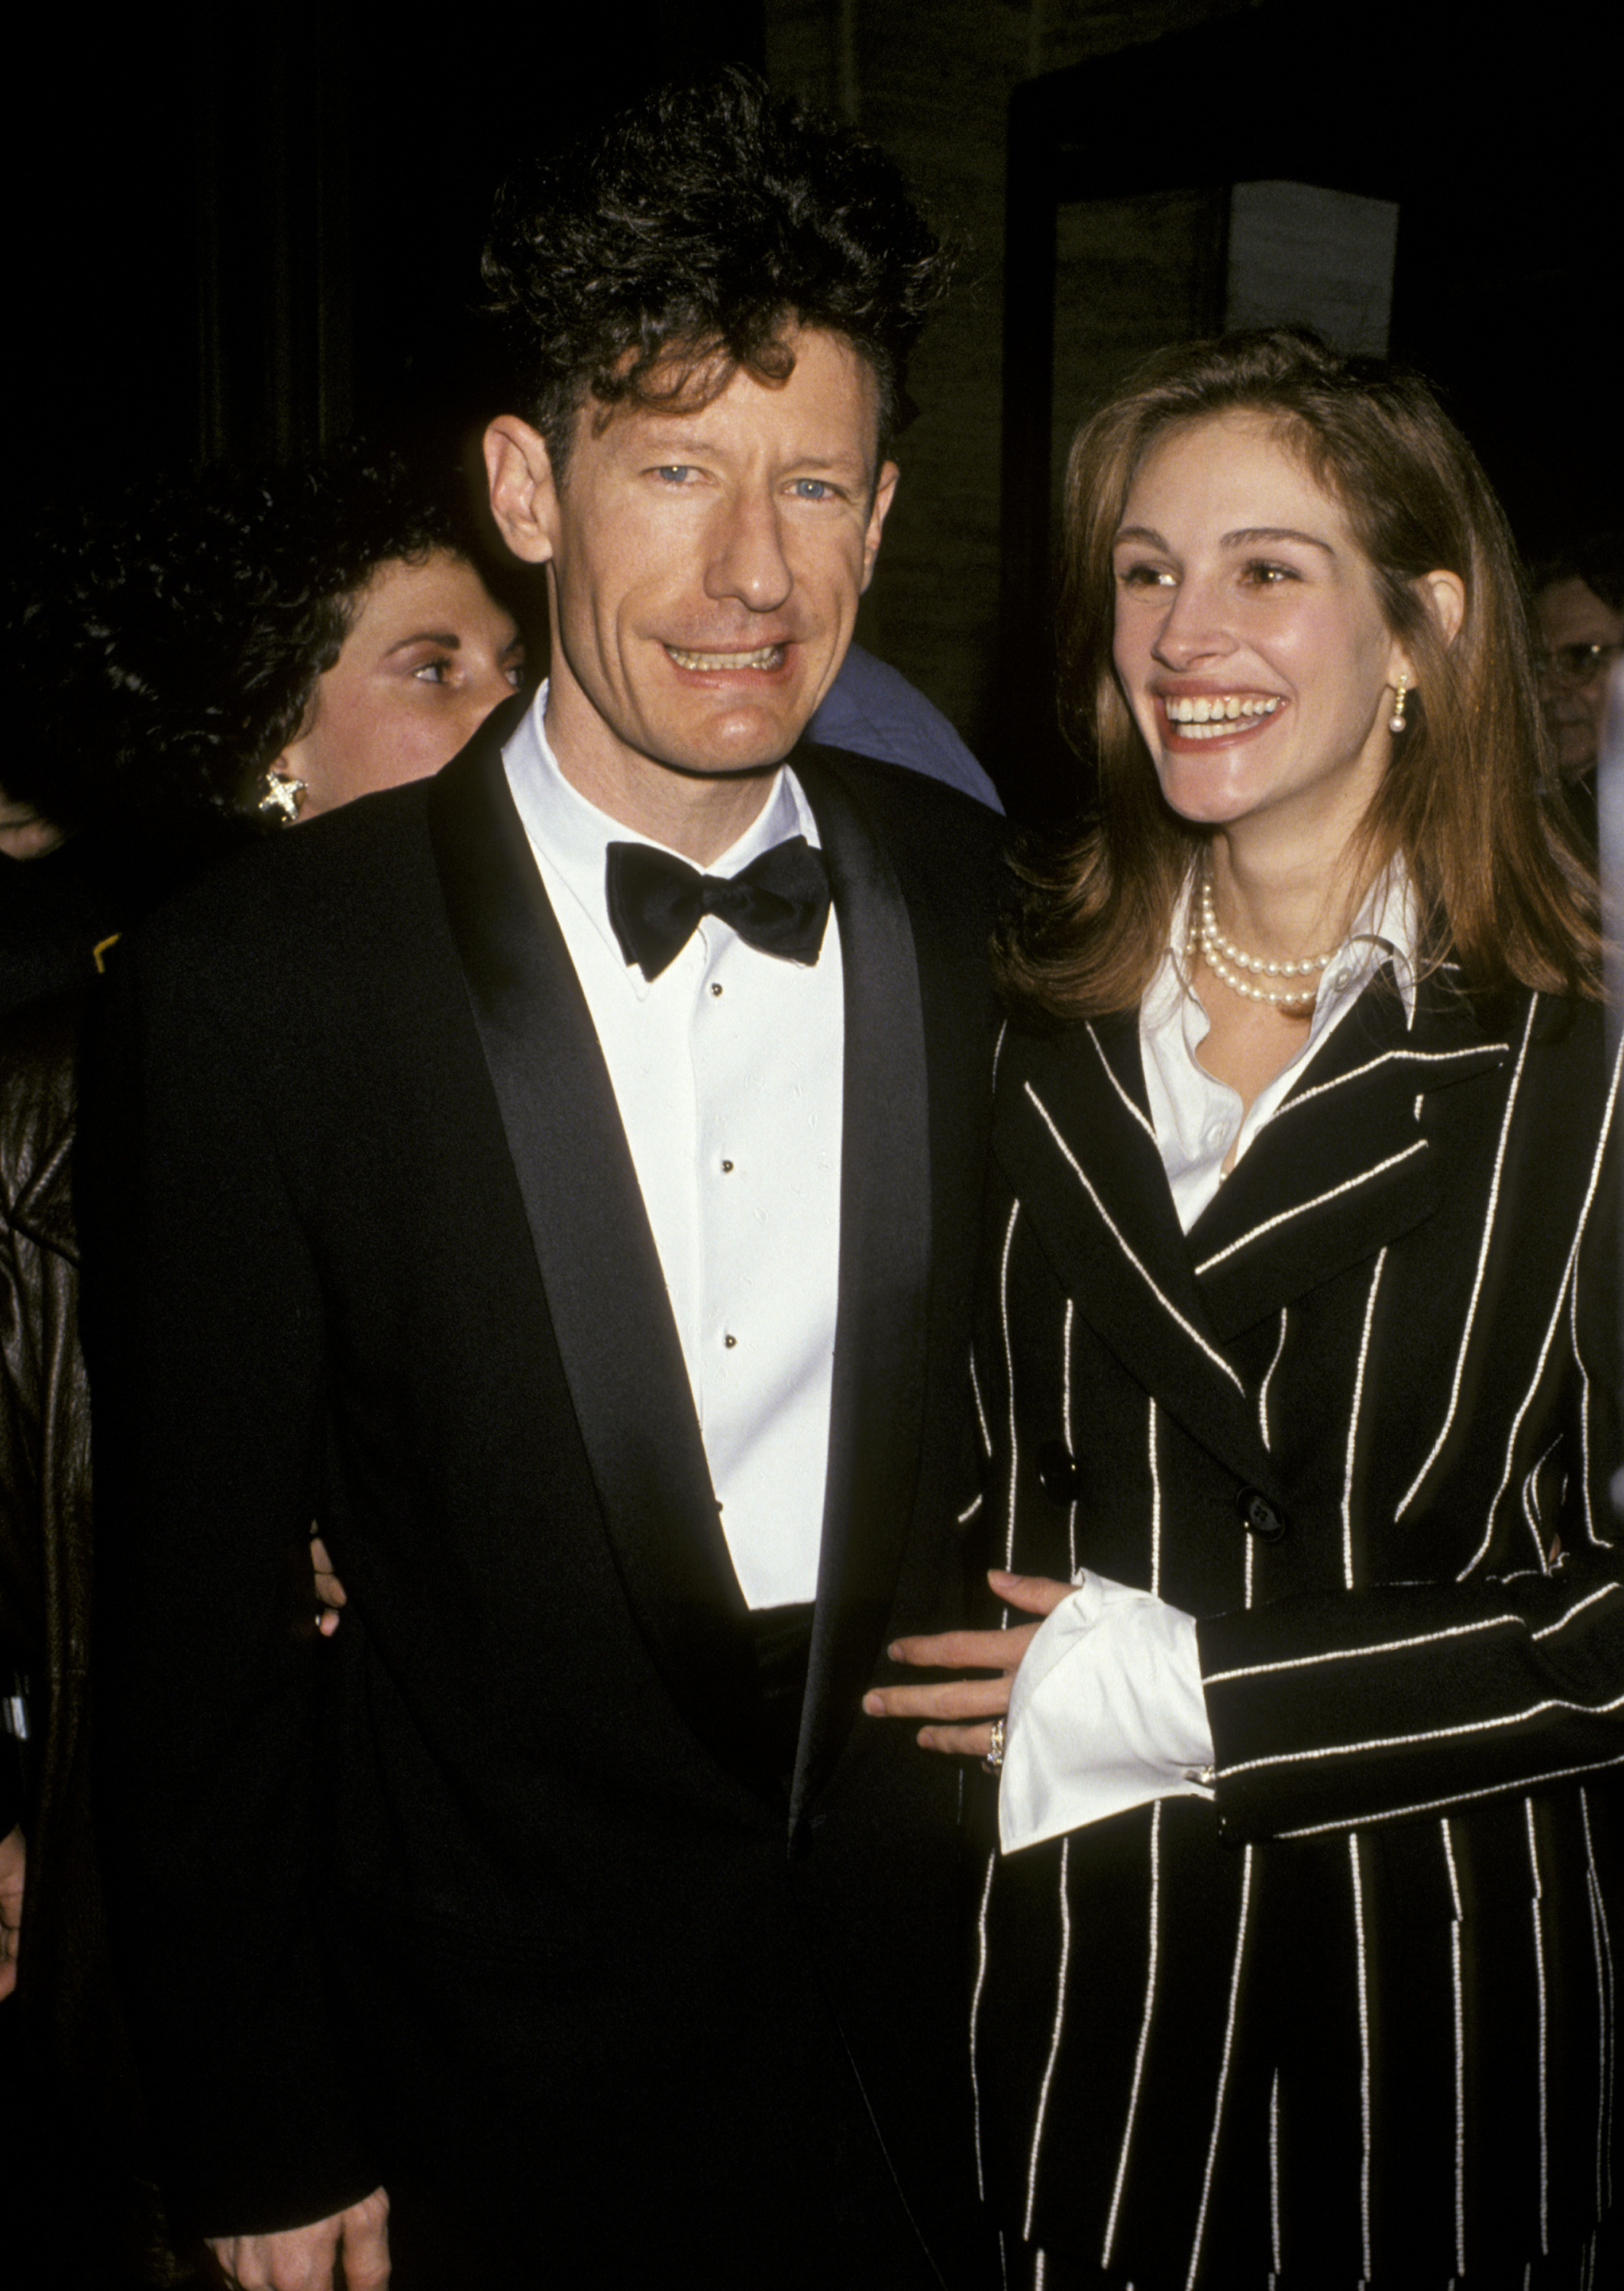 Lyle Lovett and Julia Roberts attend the opening night of The 31st Annual New York Film Festival in 1993 in New York. | Source: Getty Images